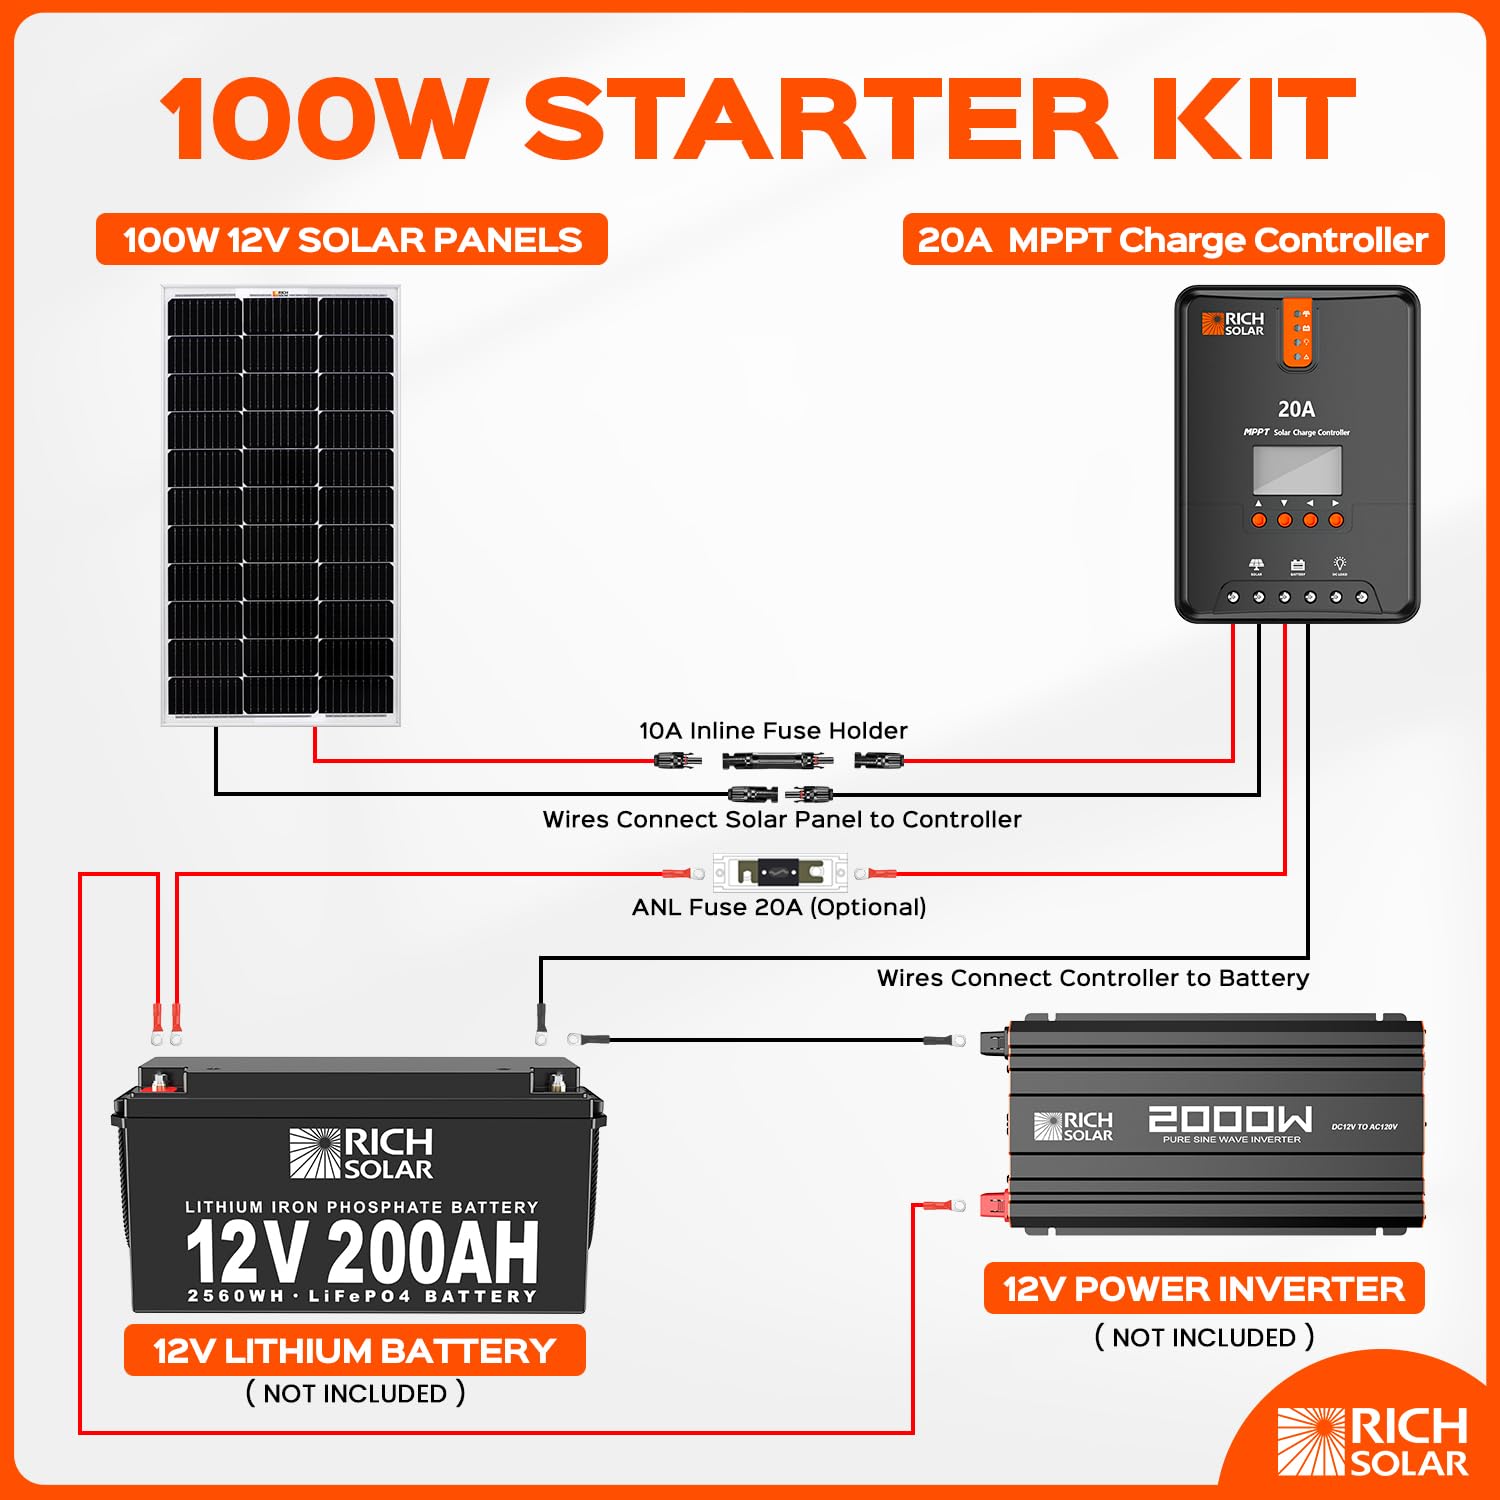 RICH SOLAR 100 Watts 12 Volts Monocrystalline Solar Starter Kit with 20A MPPT Charge Controller